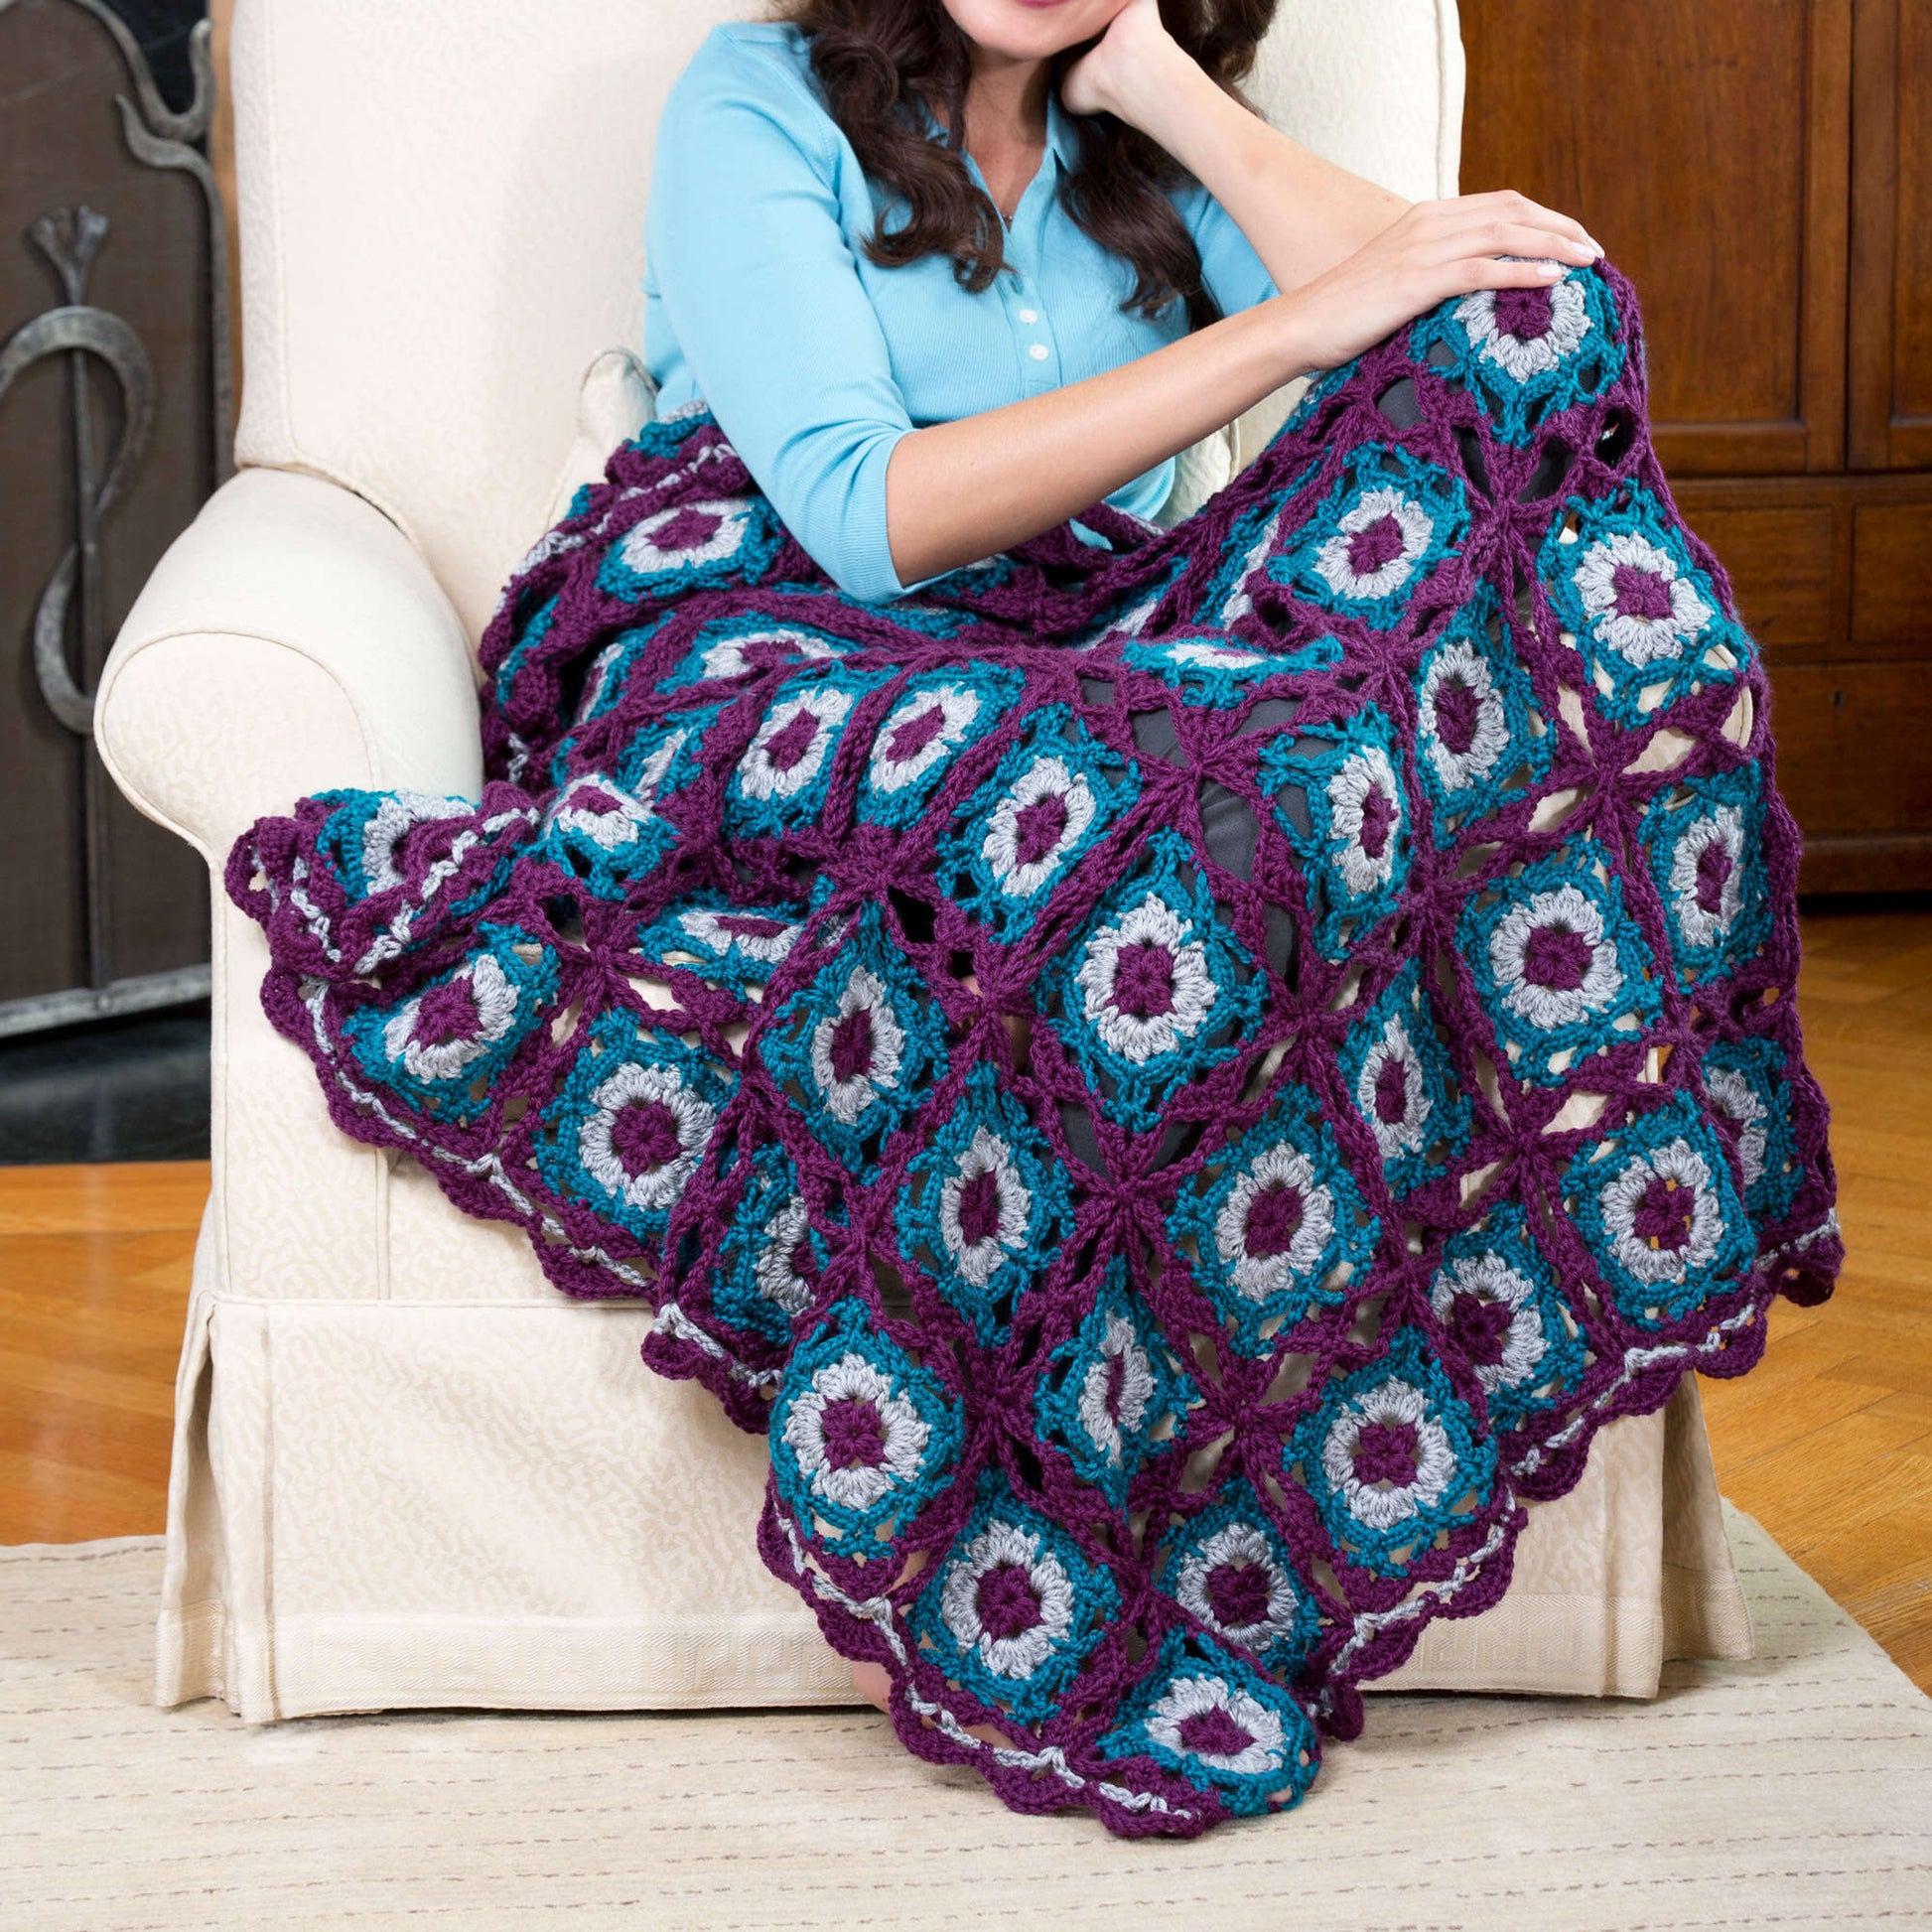 Free Red Heart Lacy Square Crochet Blanket Pattern